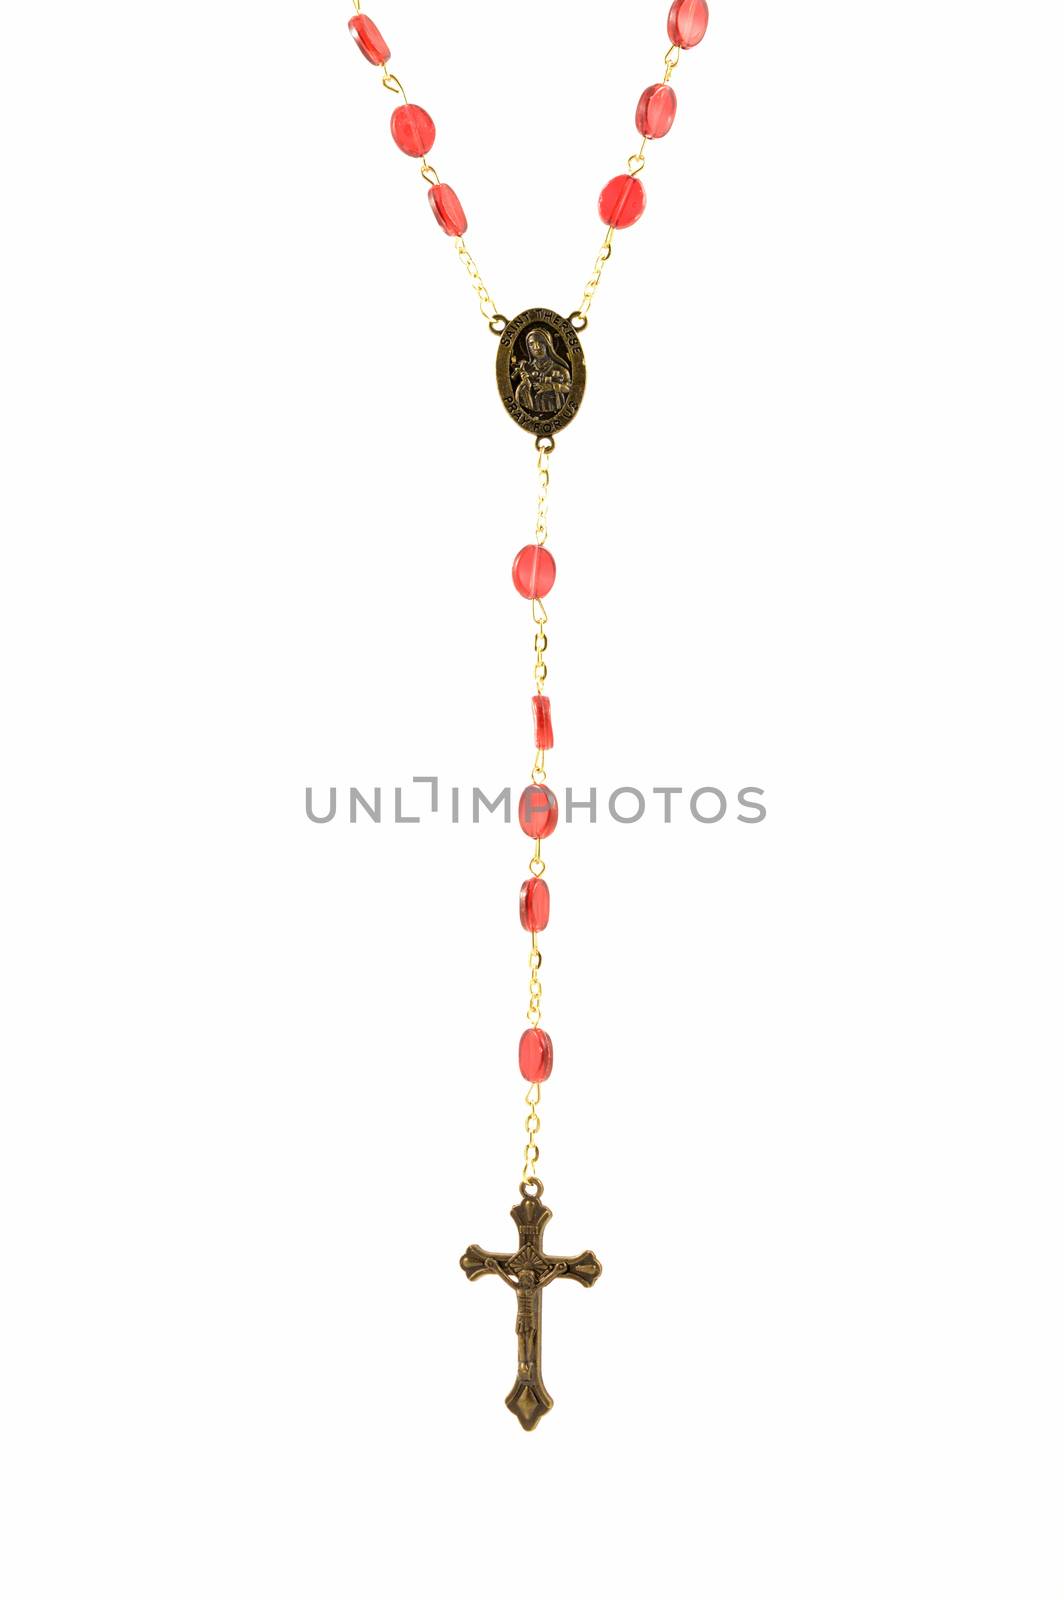 A hanging jewelry style shot of a Christian Rosary over a clean white background.